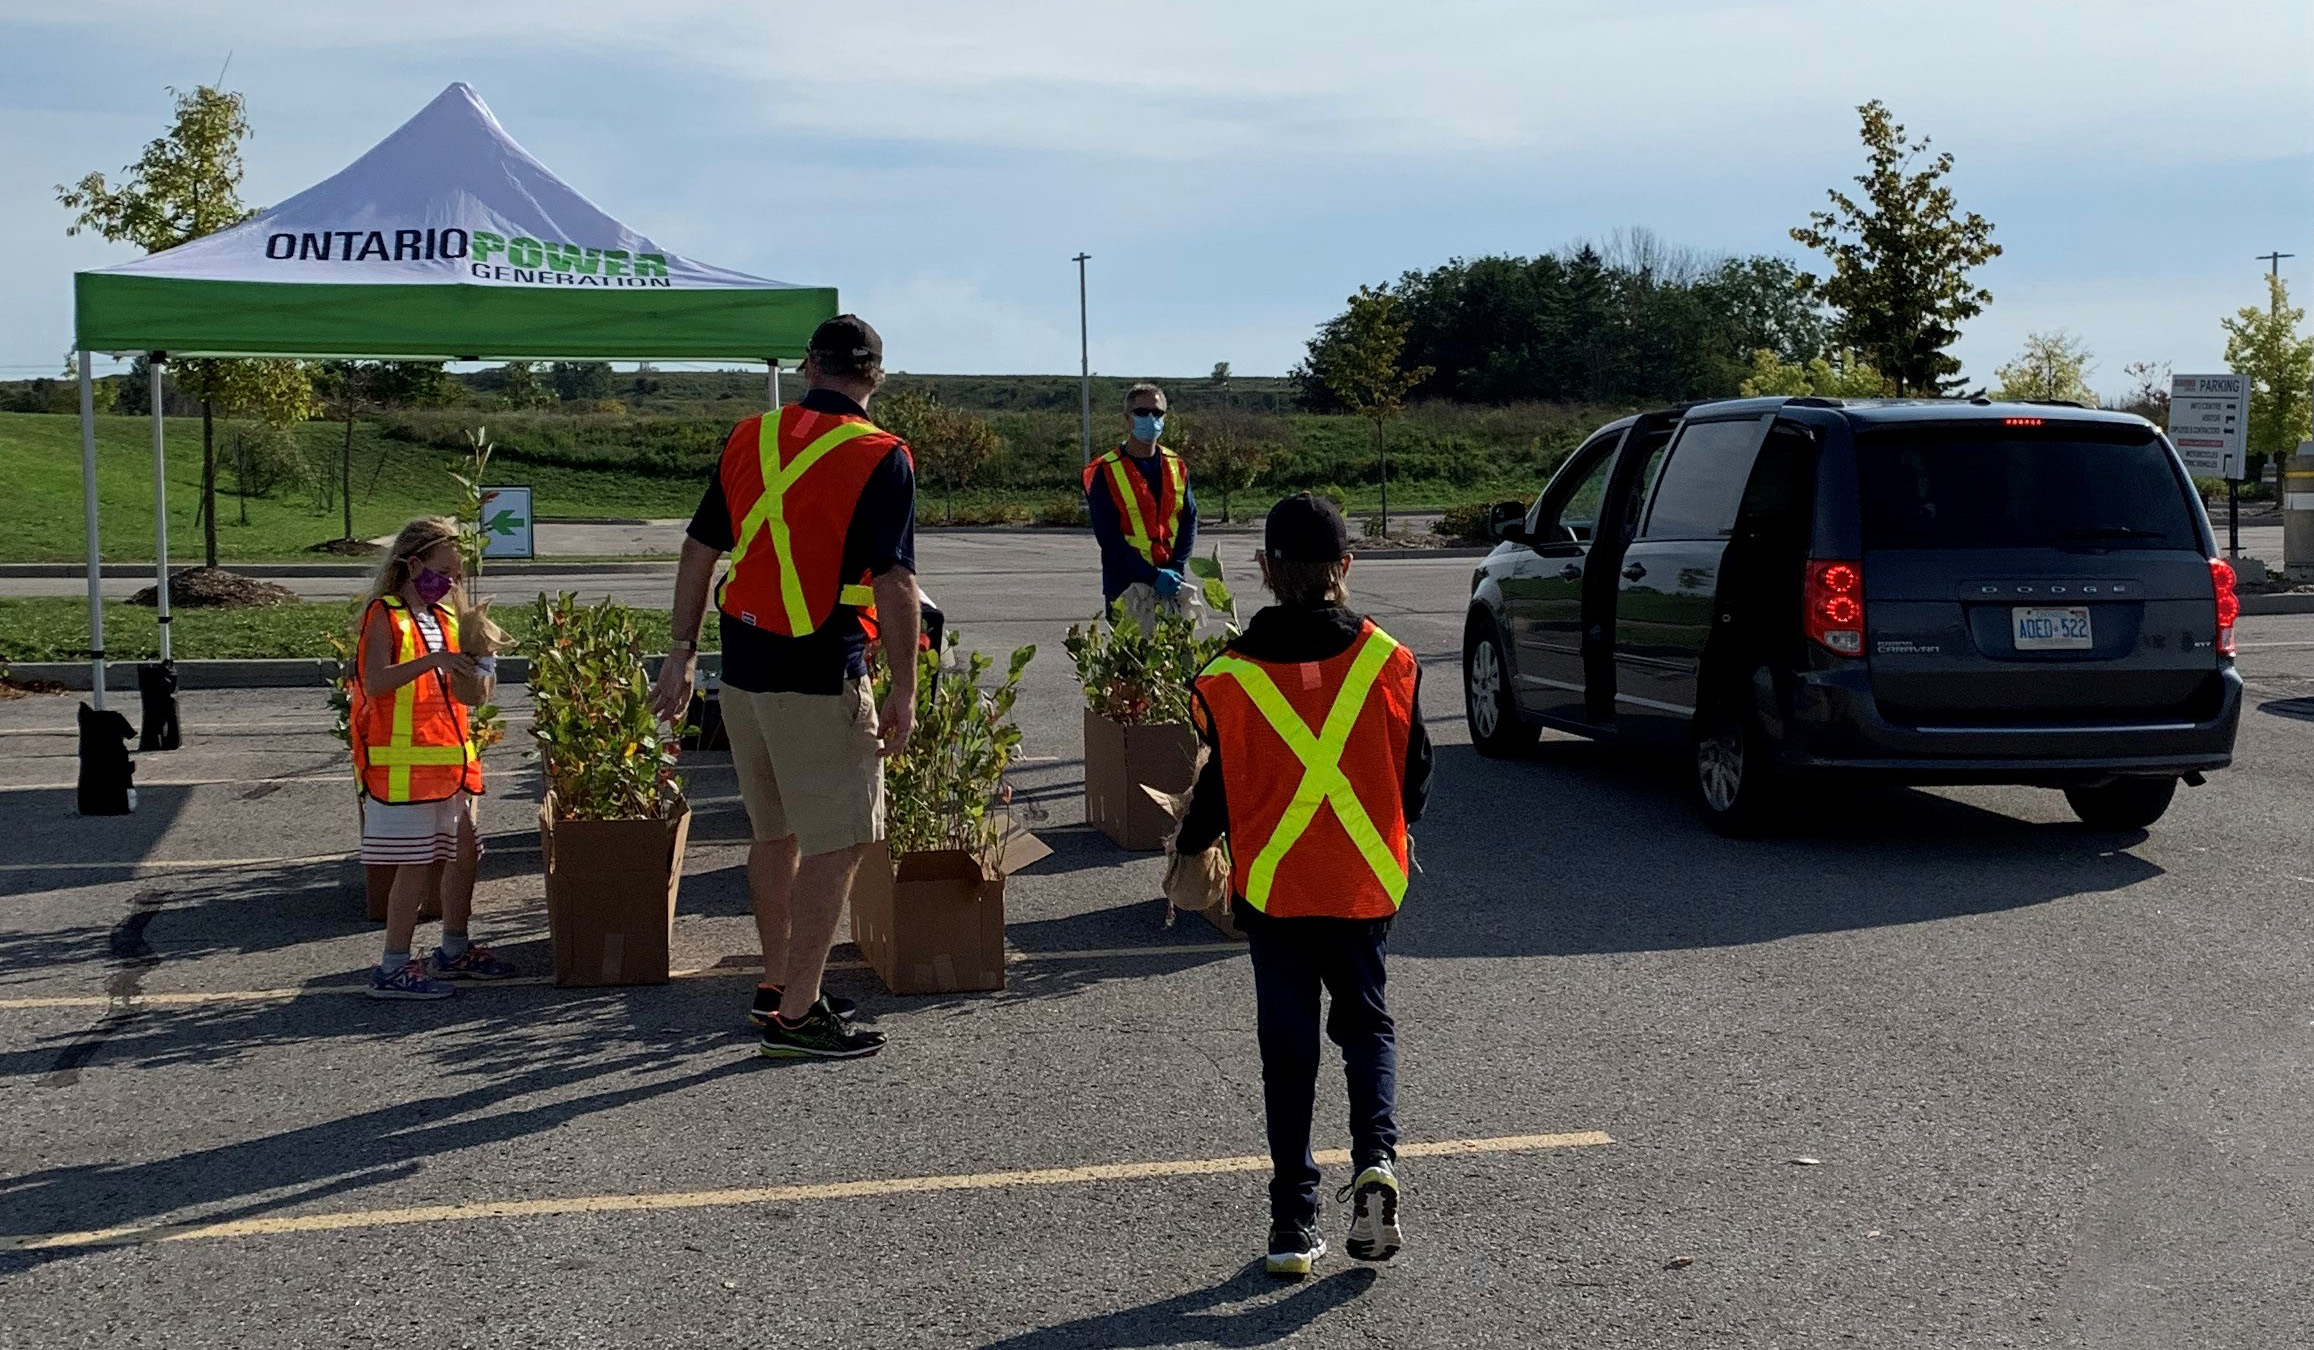 OPG hosted curbside pickups offering free Nannyberry shrubs.